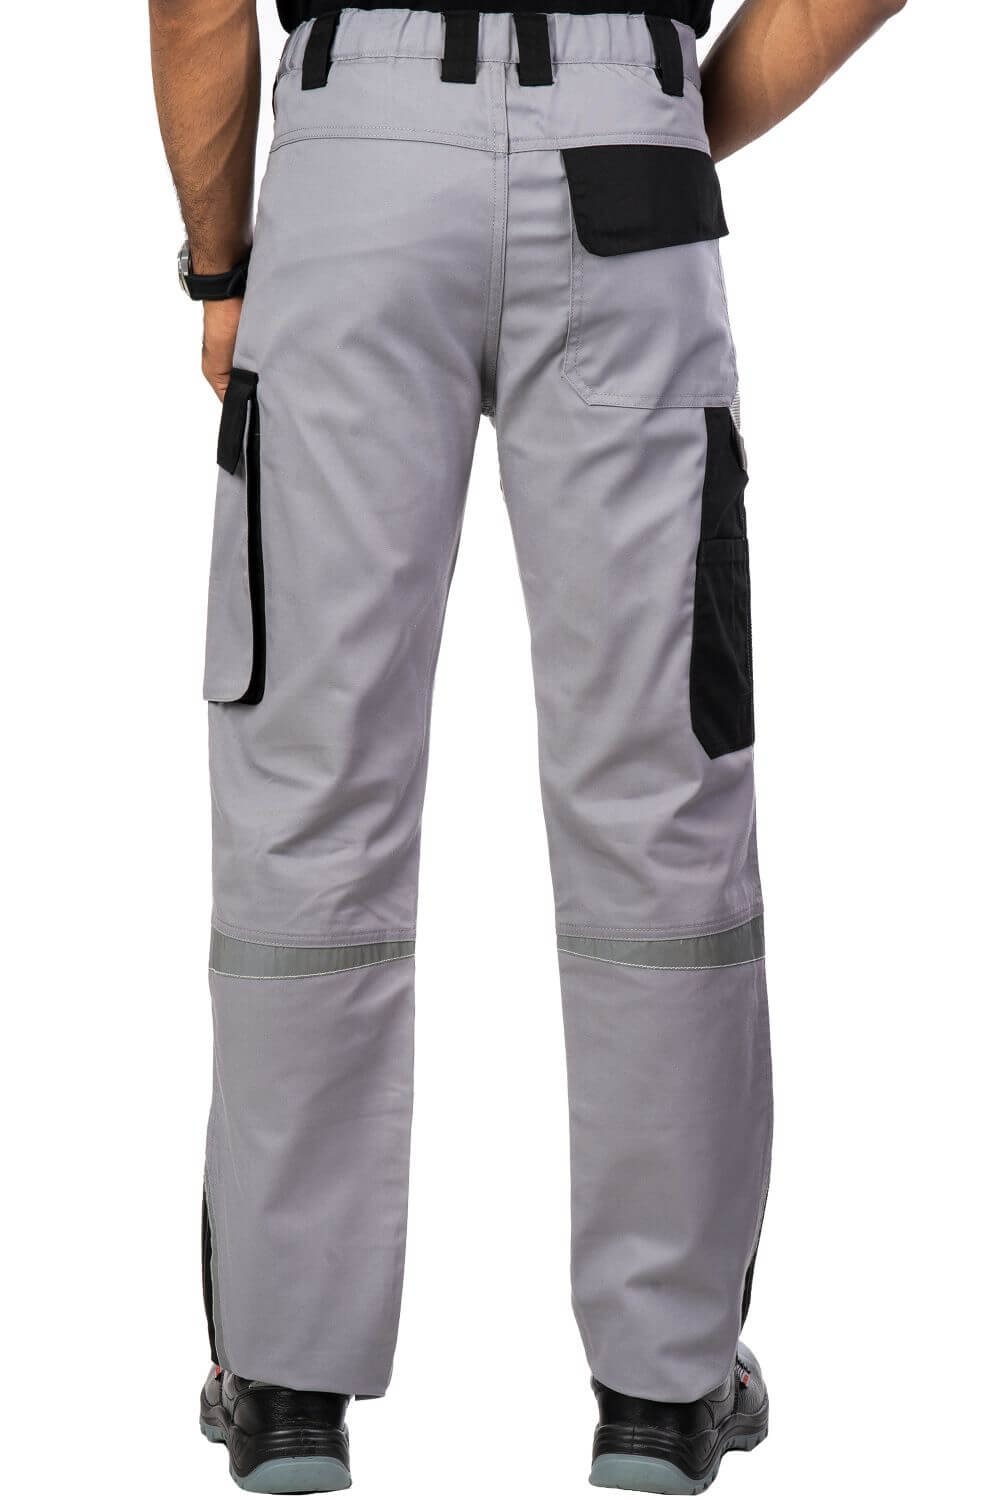 Industrial Trouser at Rs 430/piece | Industrial Trousers in Chennai | ID:  17507540512